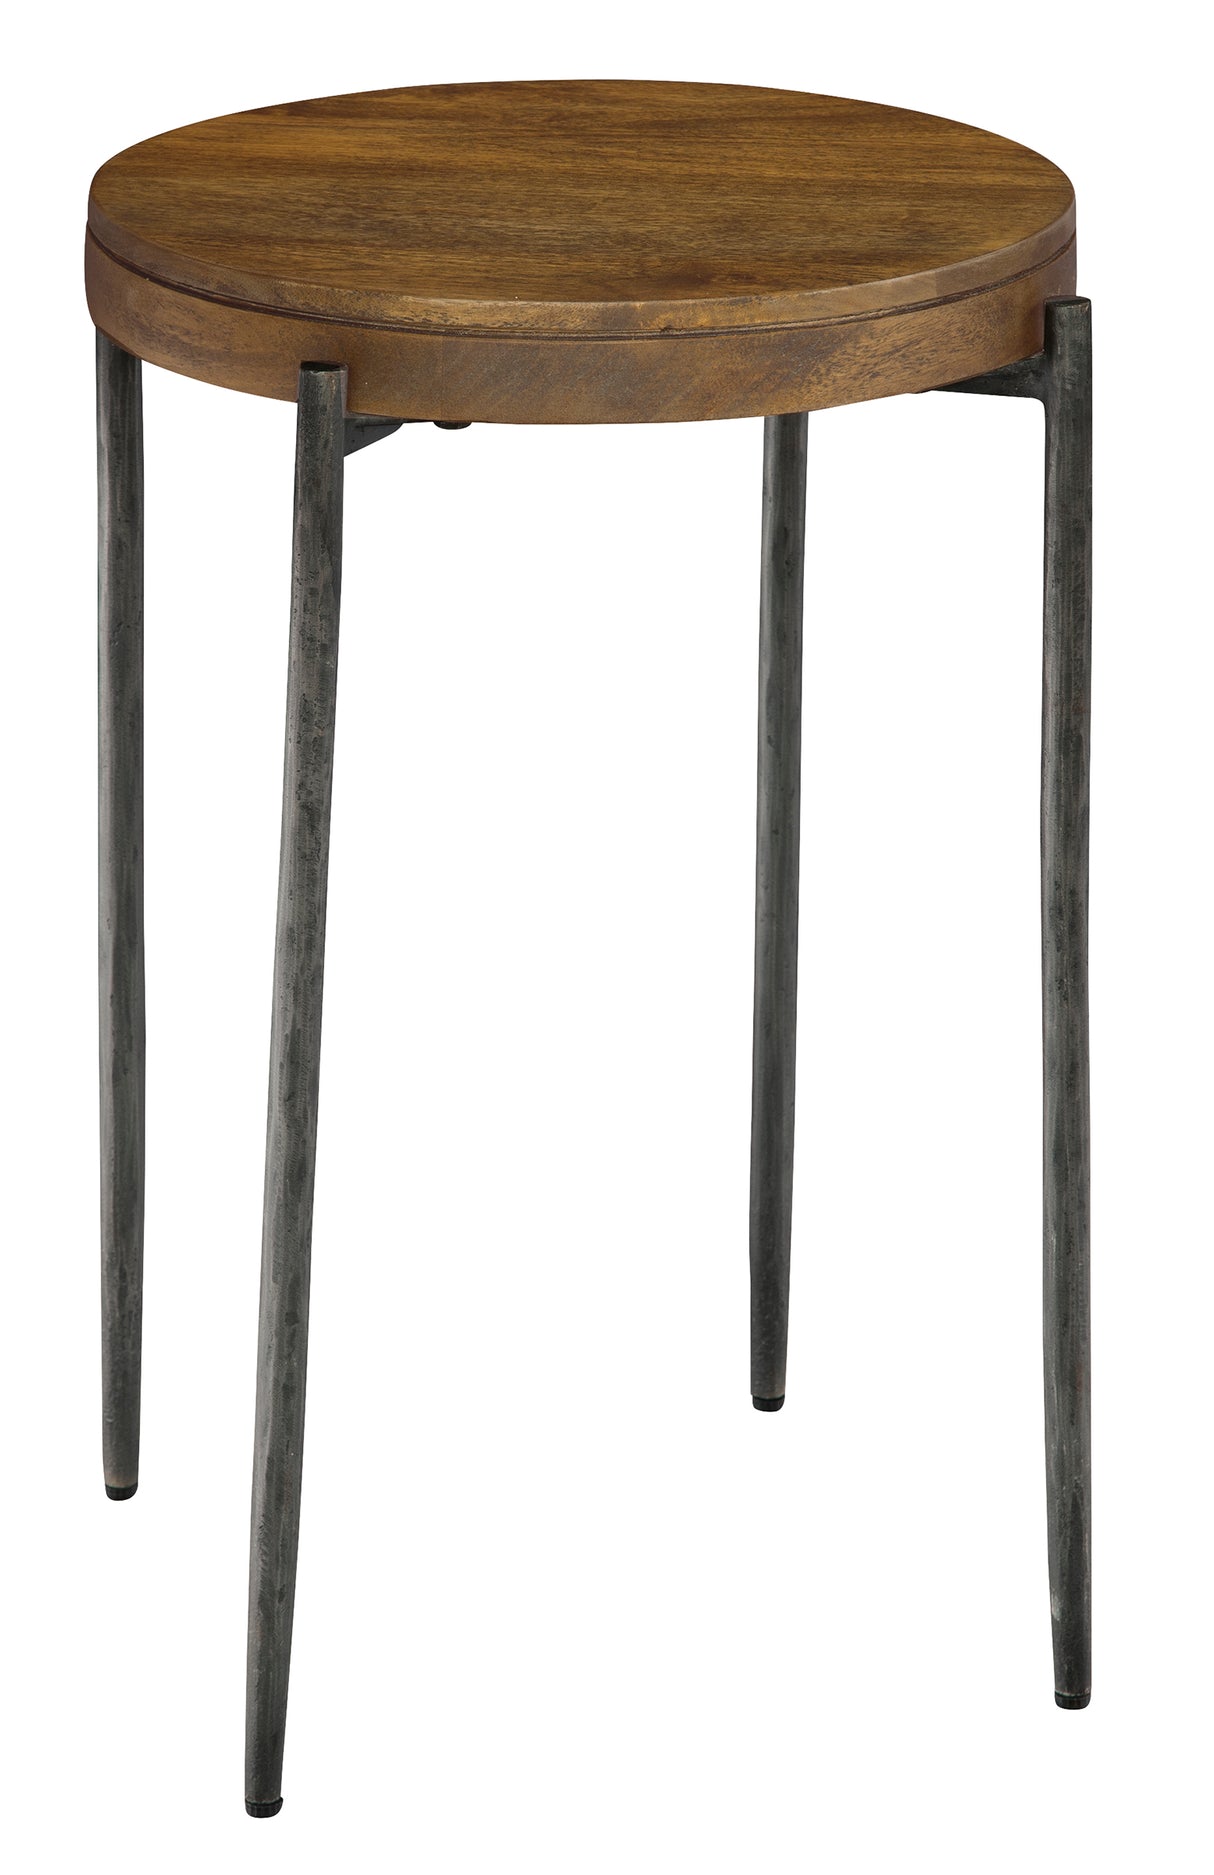 Hekman 23707 Bedford Park 17.25in. x 17.25in. x 25in. End Table